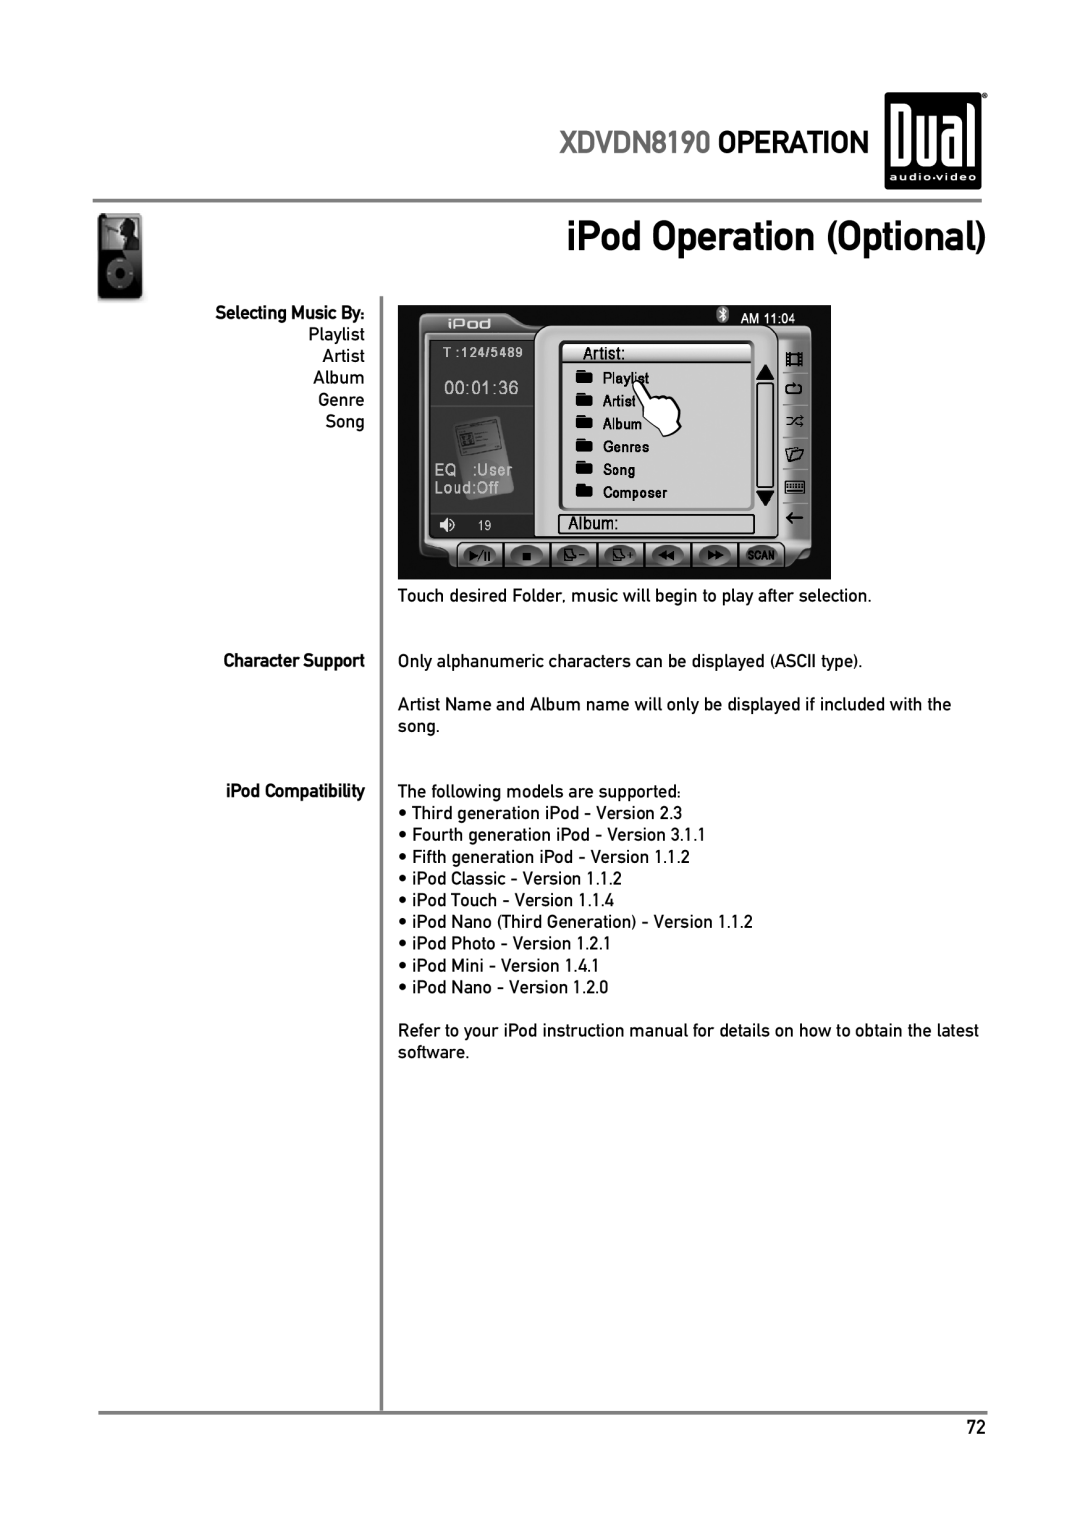 Dual owner manual iPod Operation Optional, XDVDN8190 OPERATION, Character Support iPod Compatibility 